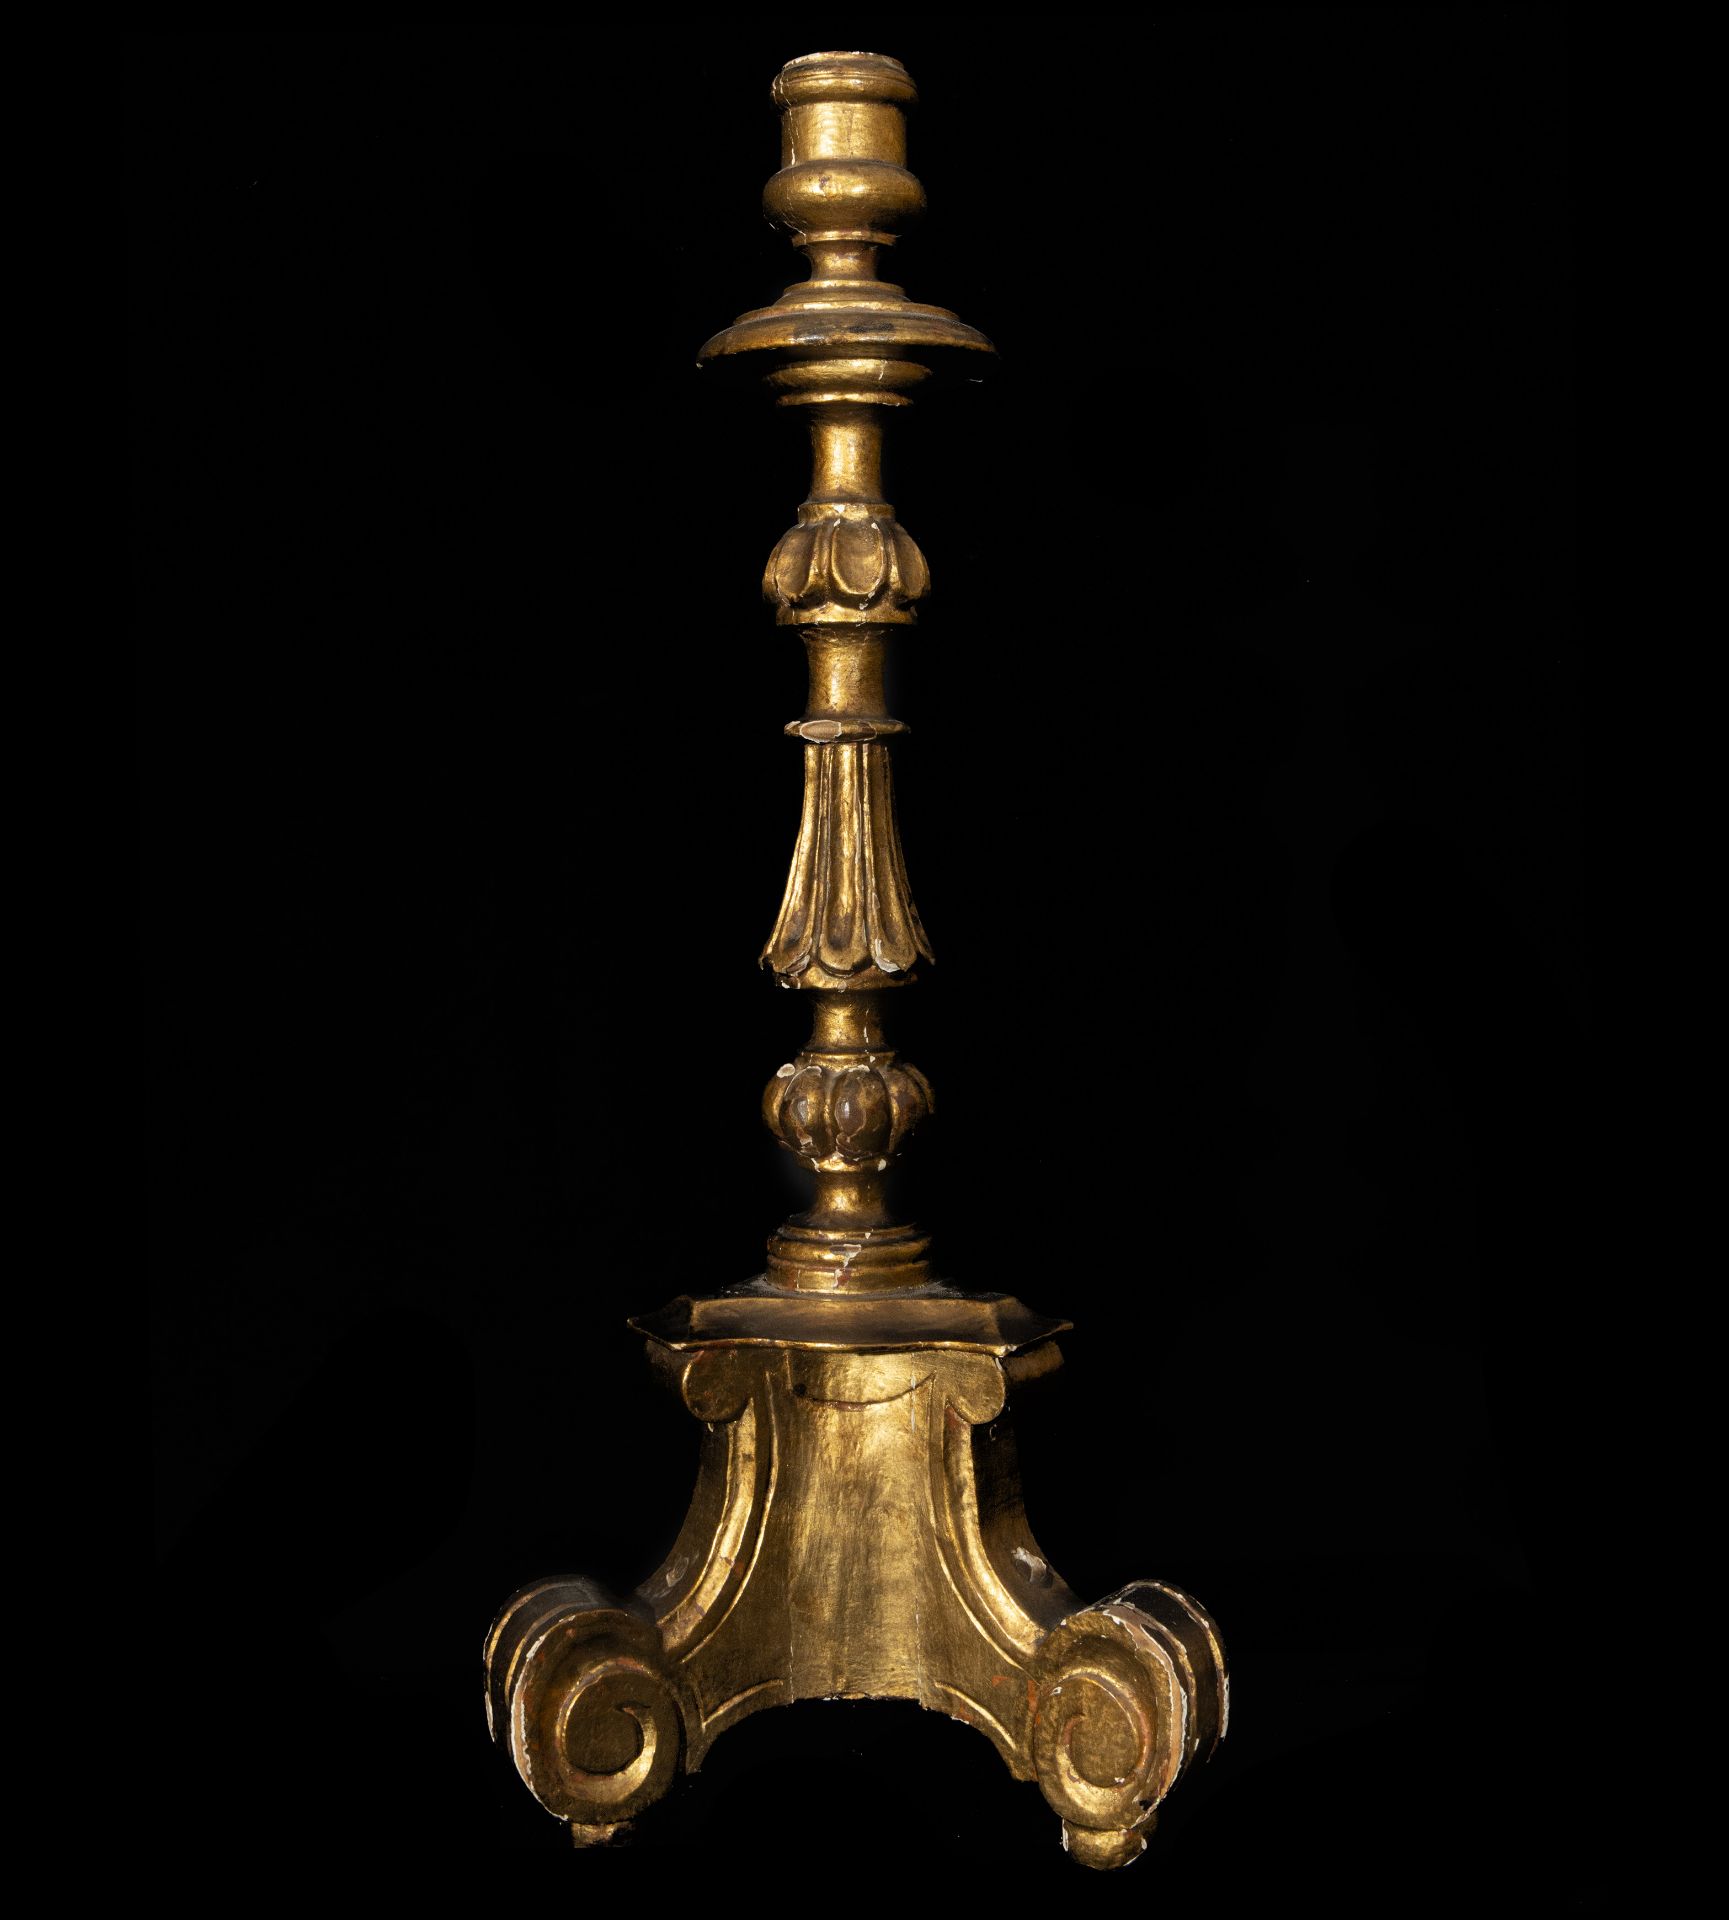 Candelabra to mount on a wooden lamp, 18th century - Image 2 of 2